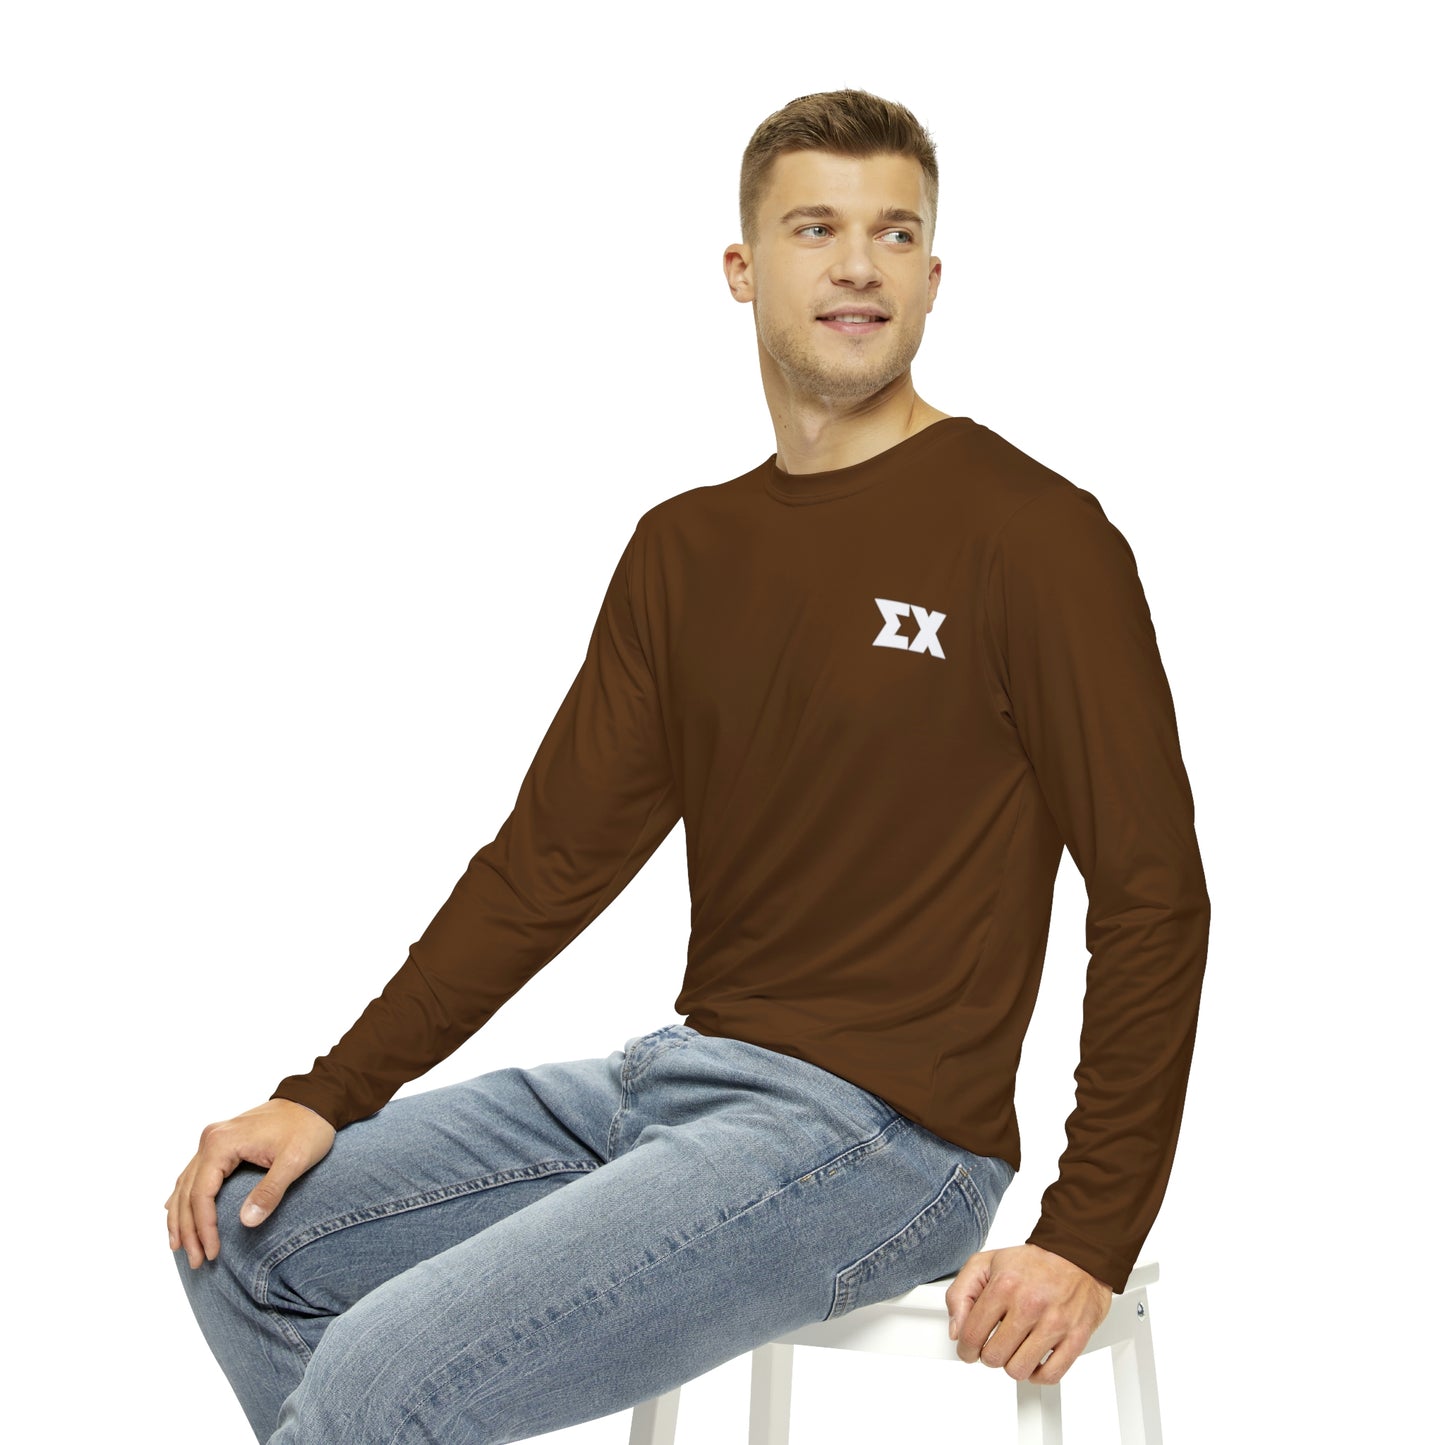 The Hinman – Brown - Sigma Chi letters Long Sleeve Active T-Shirt